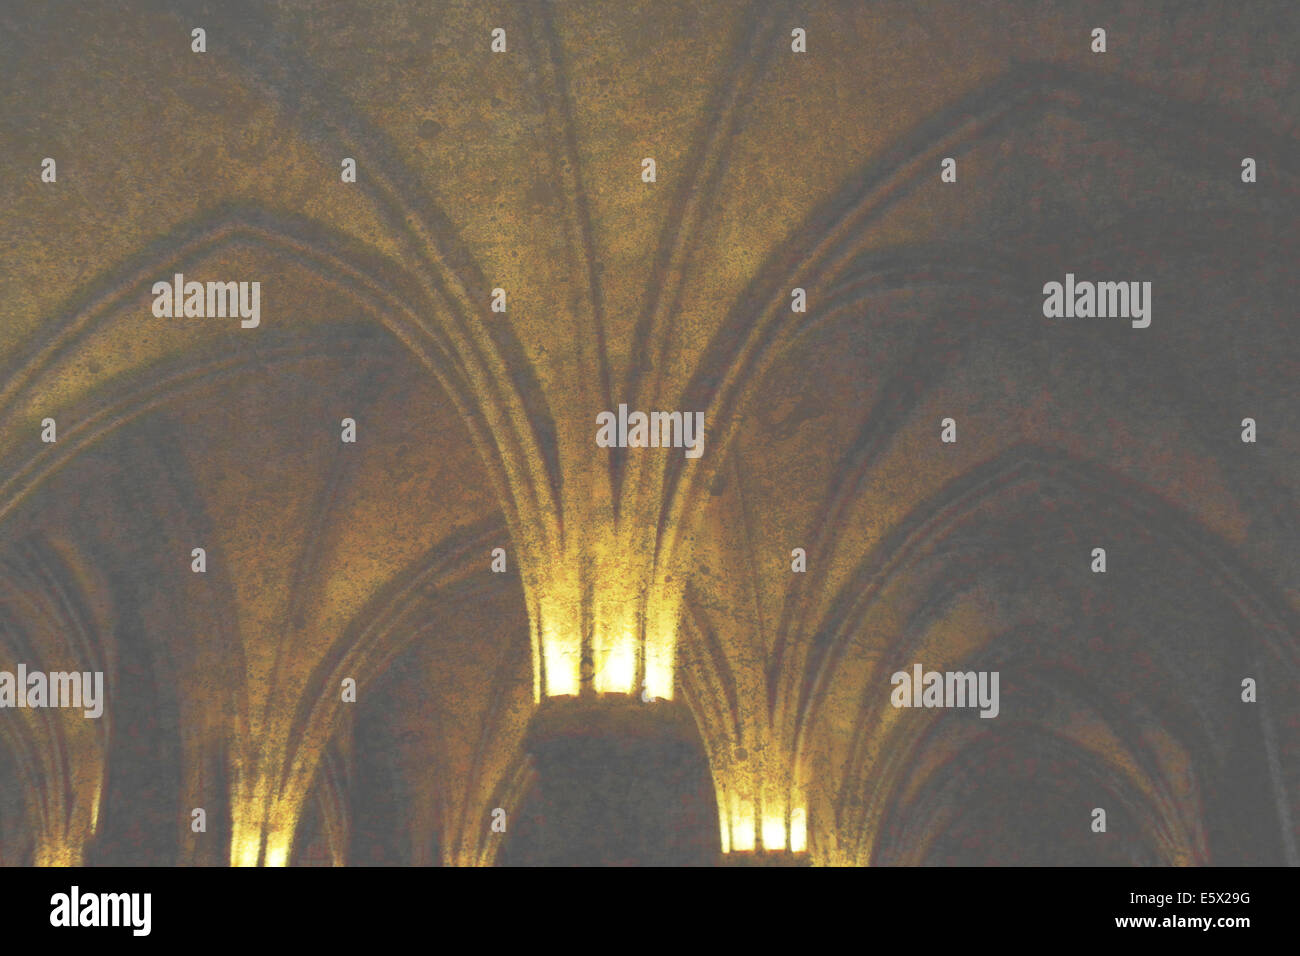 vaults within the cathedral. Architectural Styles Stock Photo